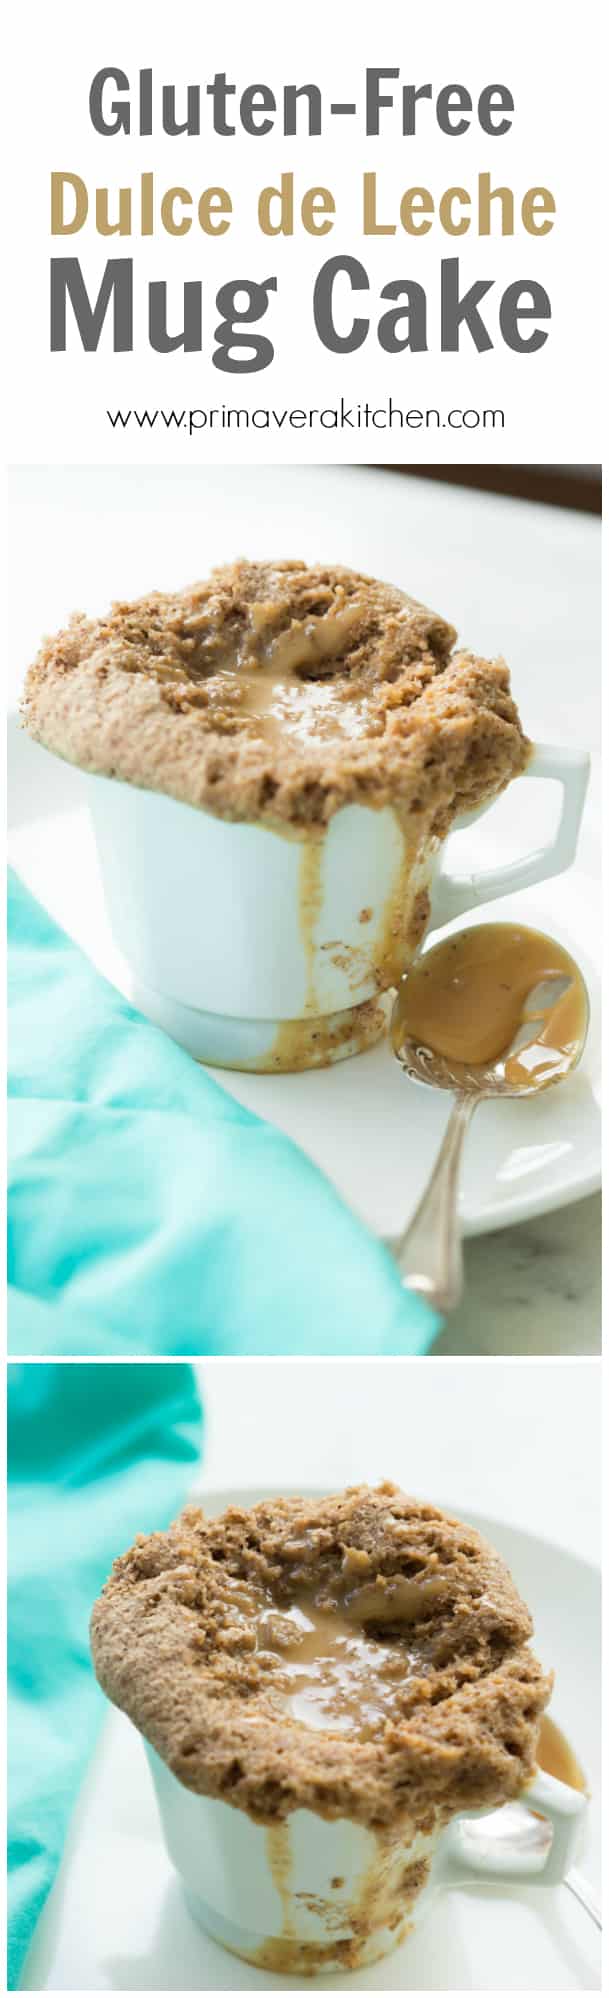 Gluten-free Dulce de Leche Mug Cake - This gluten-free Dulce de Leche Mug Cake is very moist, flavourful and takes only 3 minutes in the microwave to be ready. Don't have dulce de leche? Just use peanut butter instead and make it a vegan cake too. 